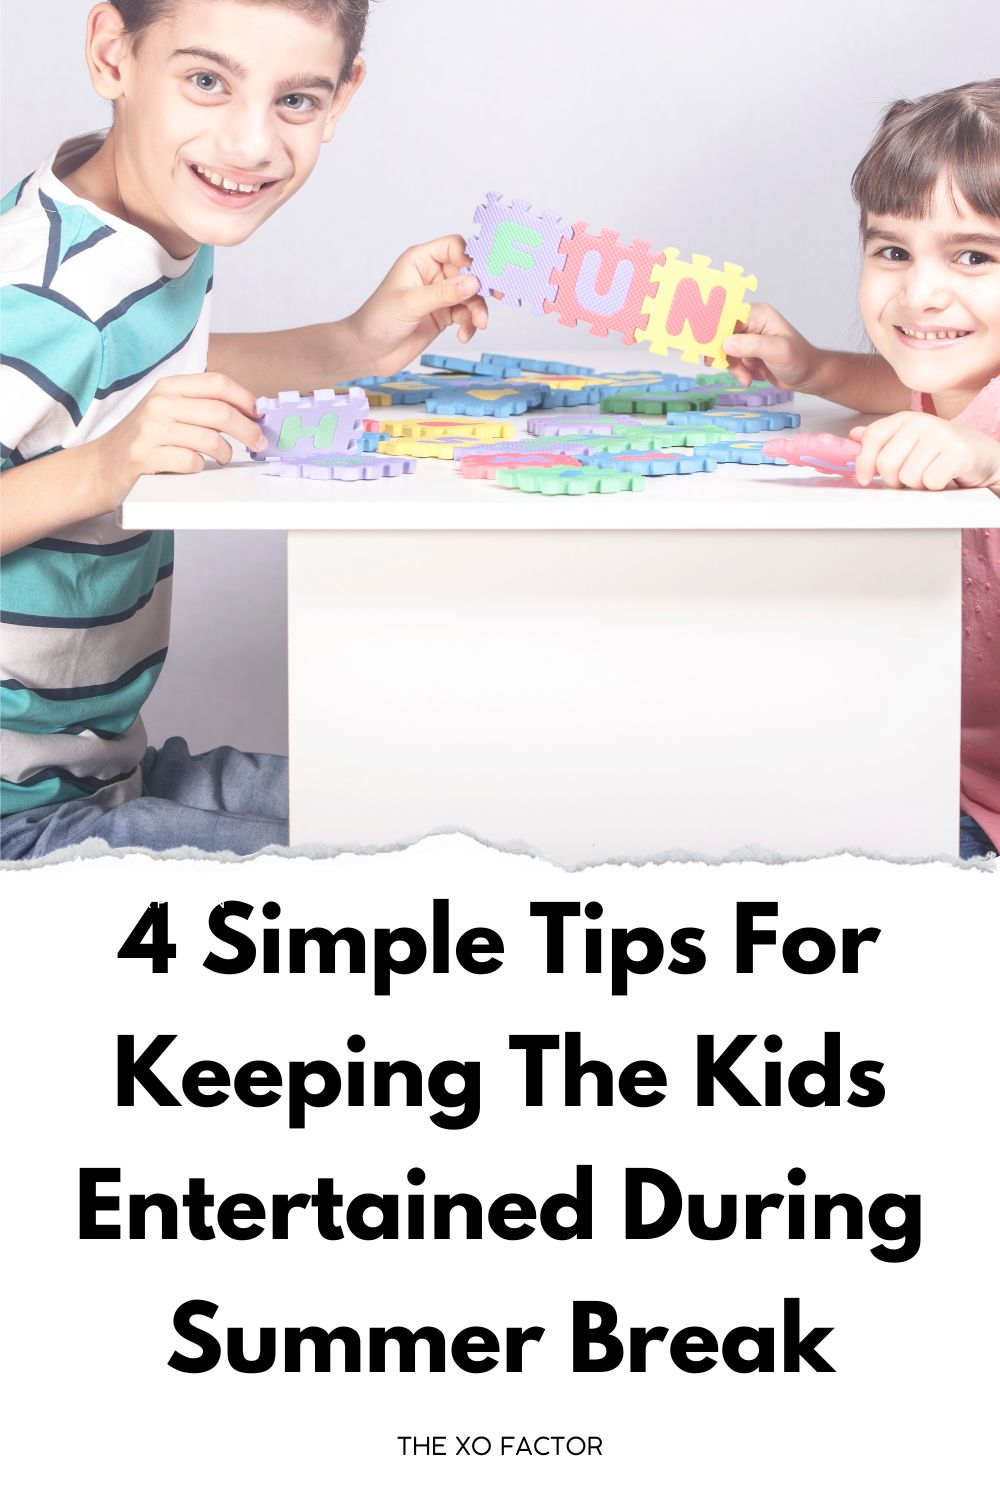 4 Simple Tips For Keeping The Kids Entertained During Summer Break